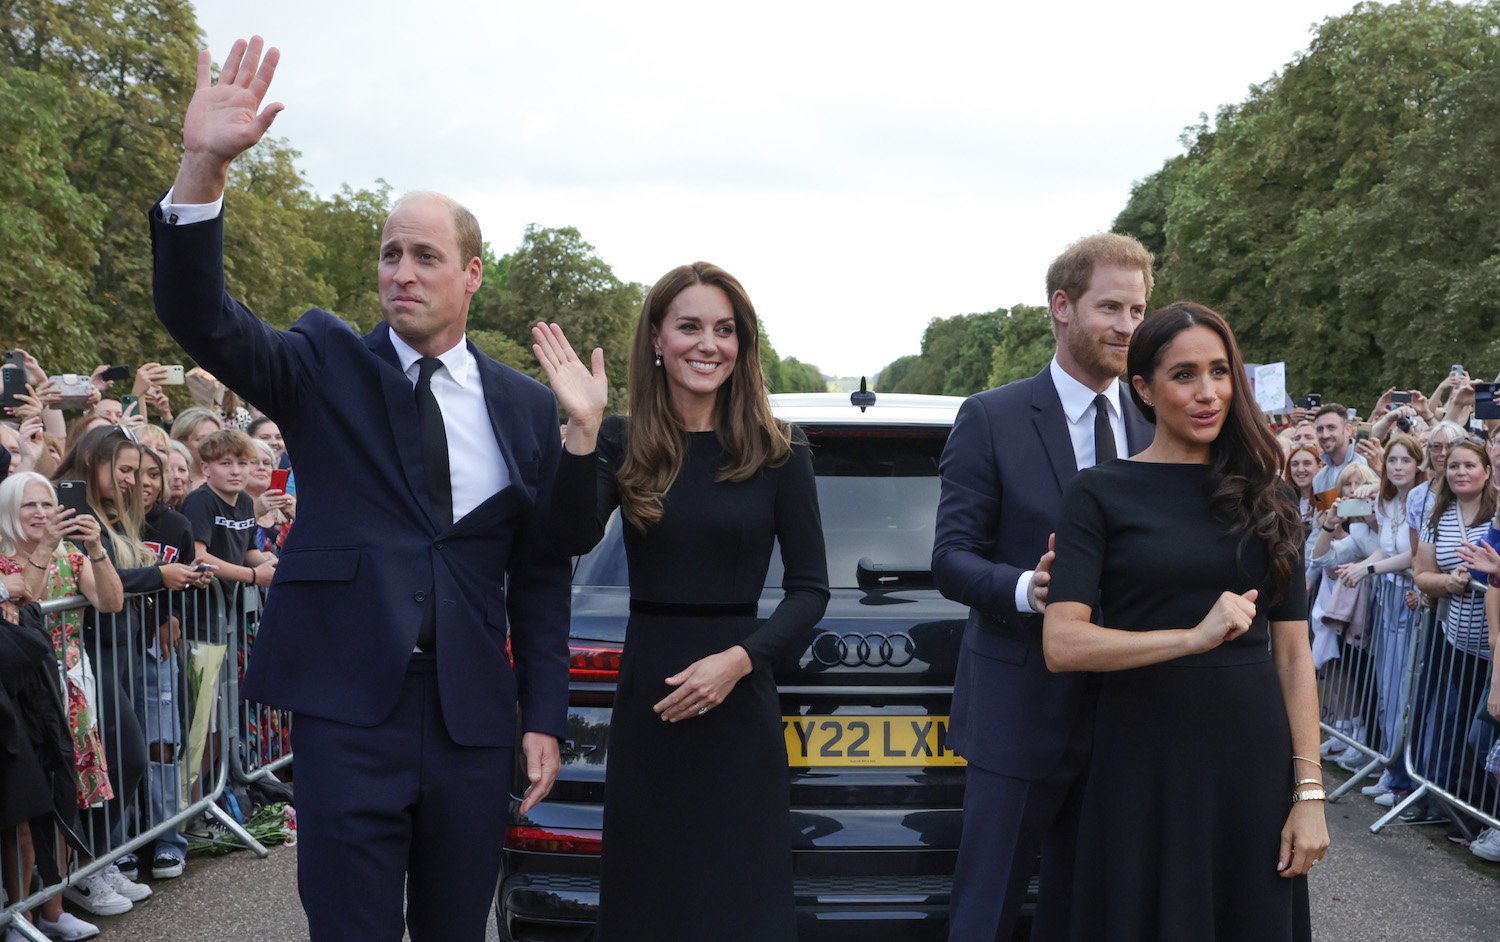 Body Language Expert Points Out Signs Meghan Markle Was Uncomfortable Around Prince William and Kate Middleton During Recent Appearance